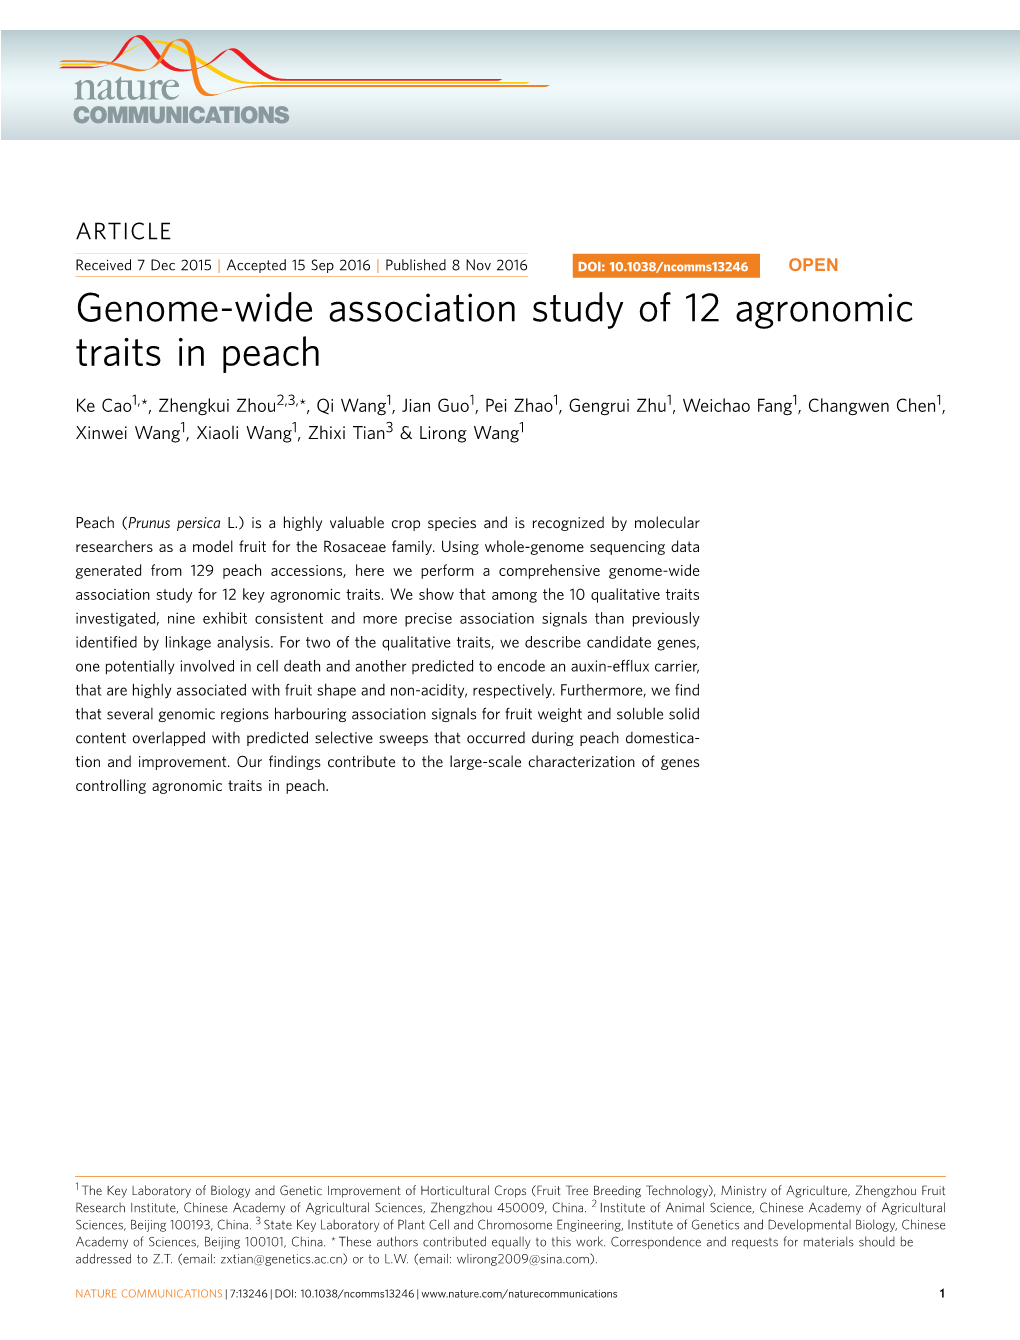 Genome-Wide Association Study of 12 Agronomic Traits in Peach